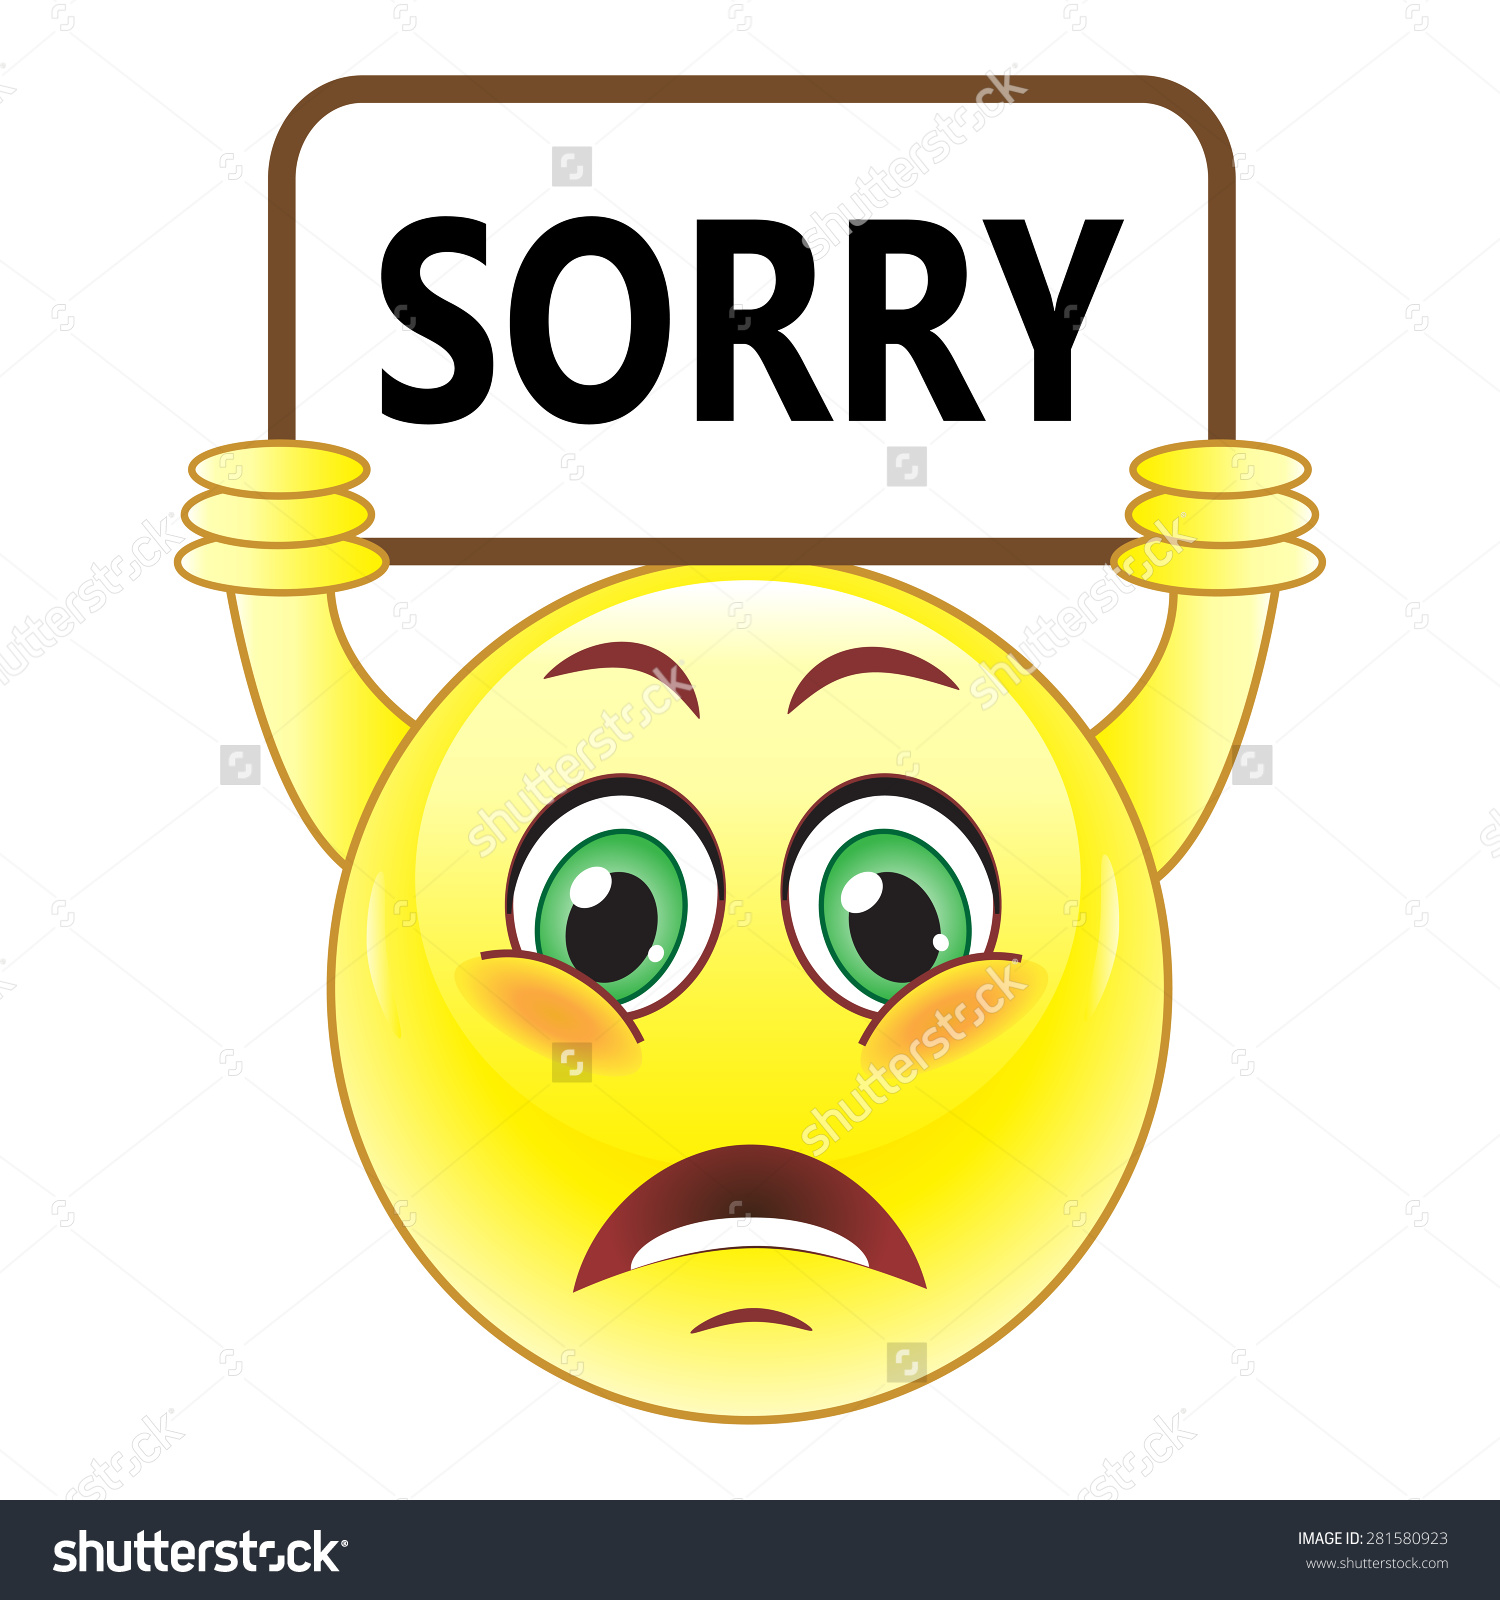 im-sorry-clipart-free-download-on-clipartmag